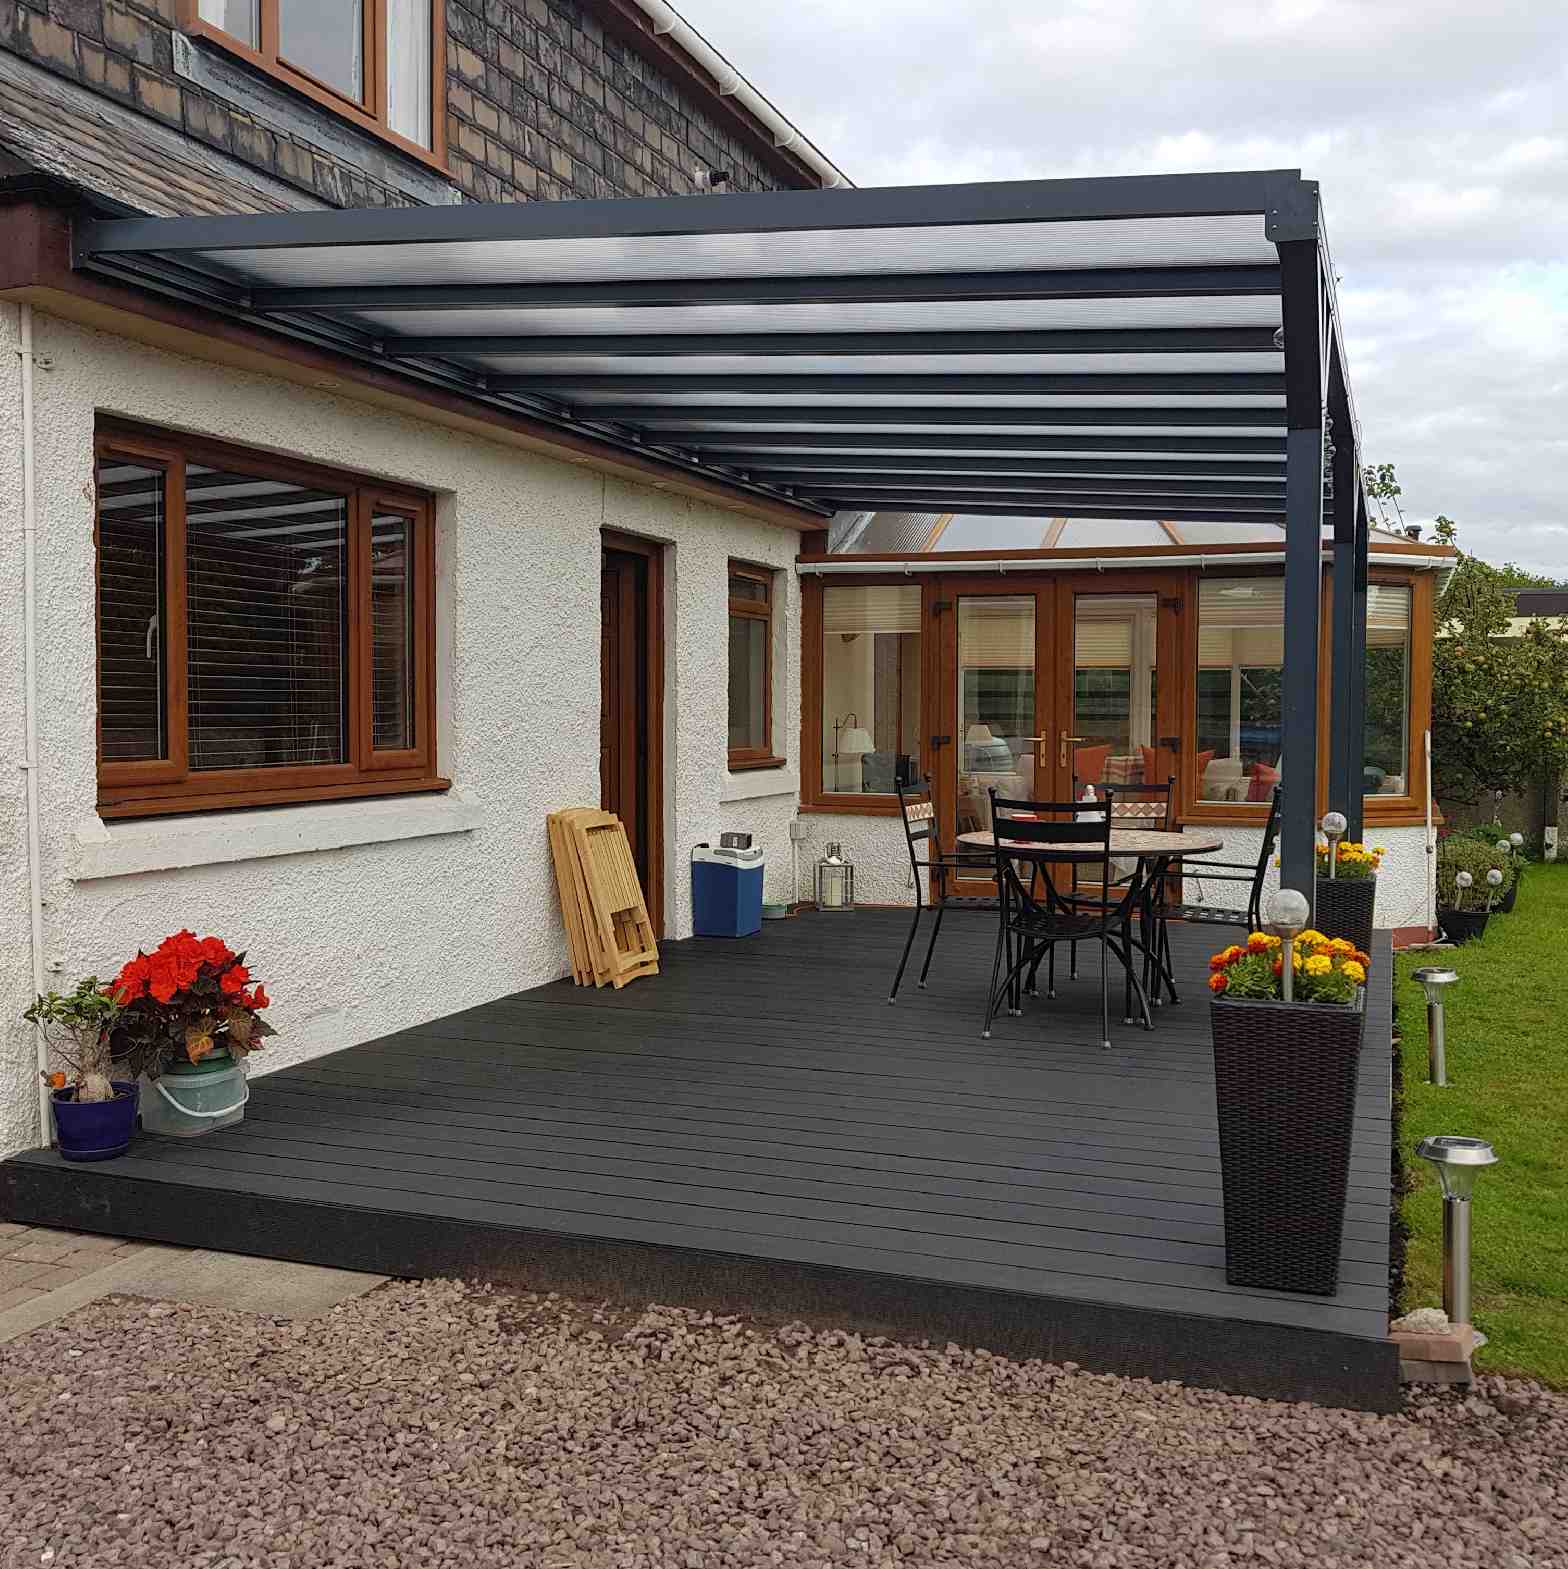 Buy Omega Verandah, Anthracite Grey, 16mm Polycarbonate Glazing - 4.2m (W) x 3.5m (P), (3) Supporting Posts online today